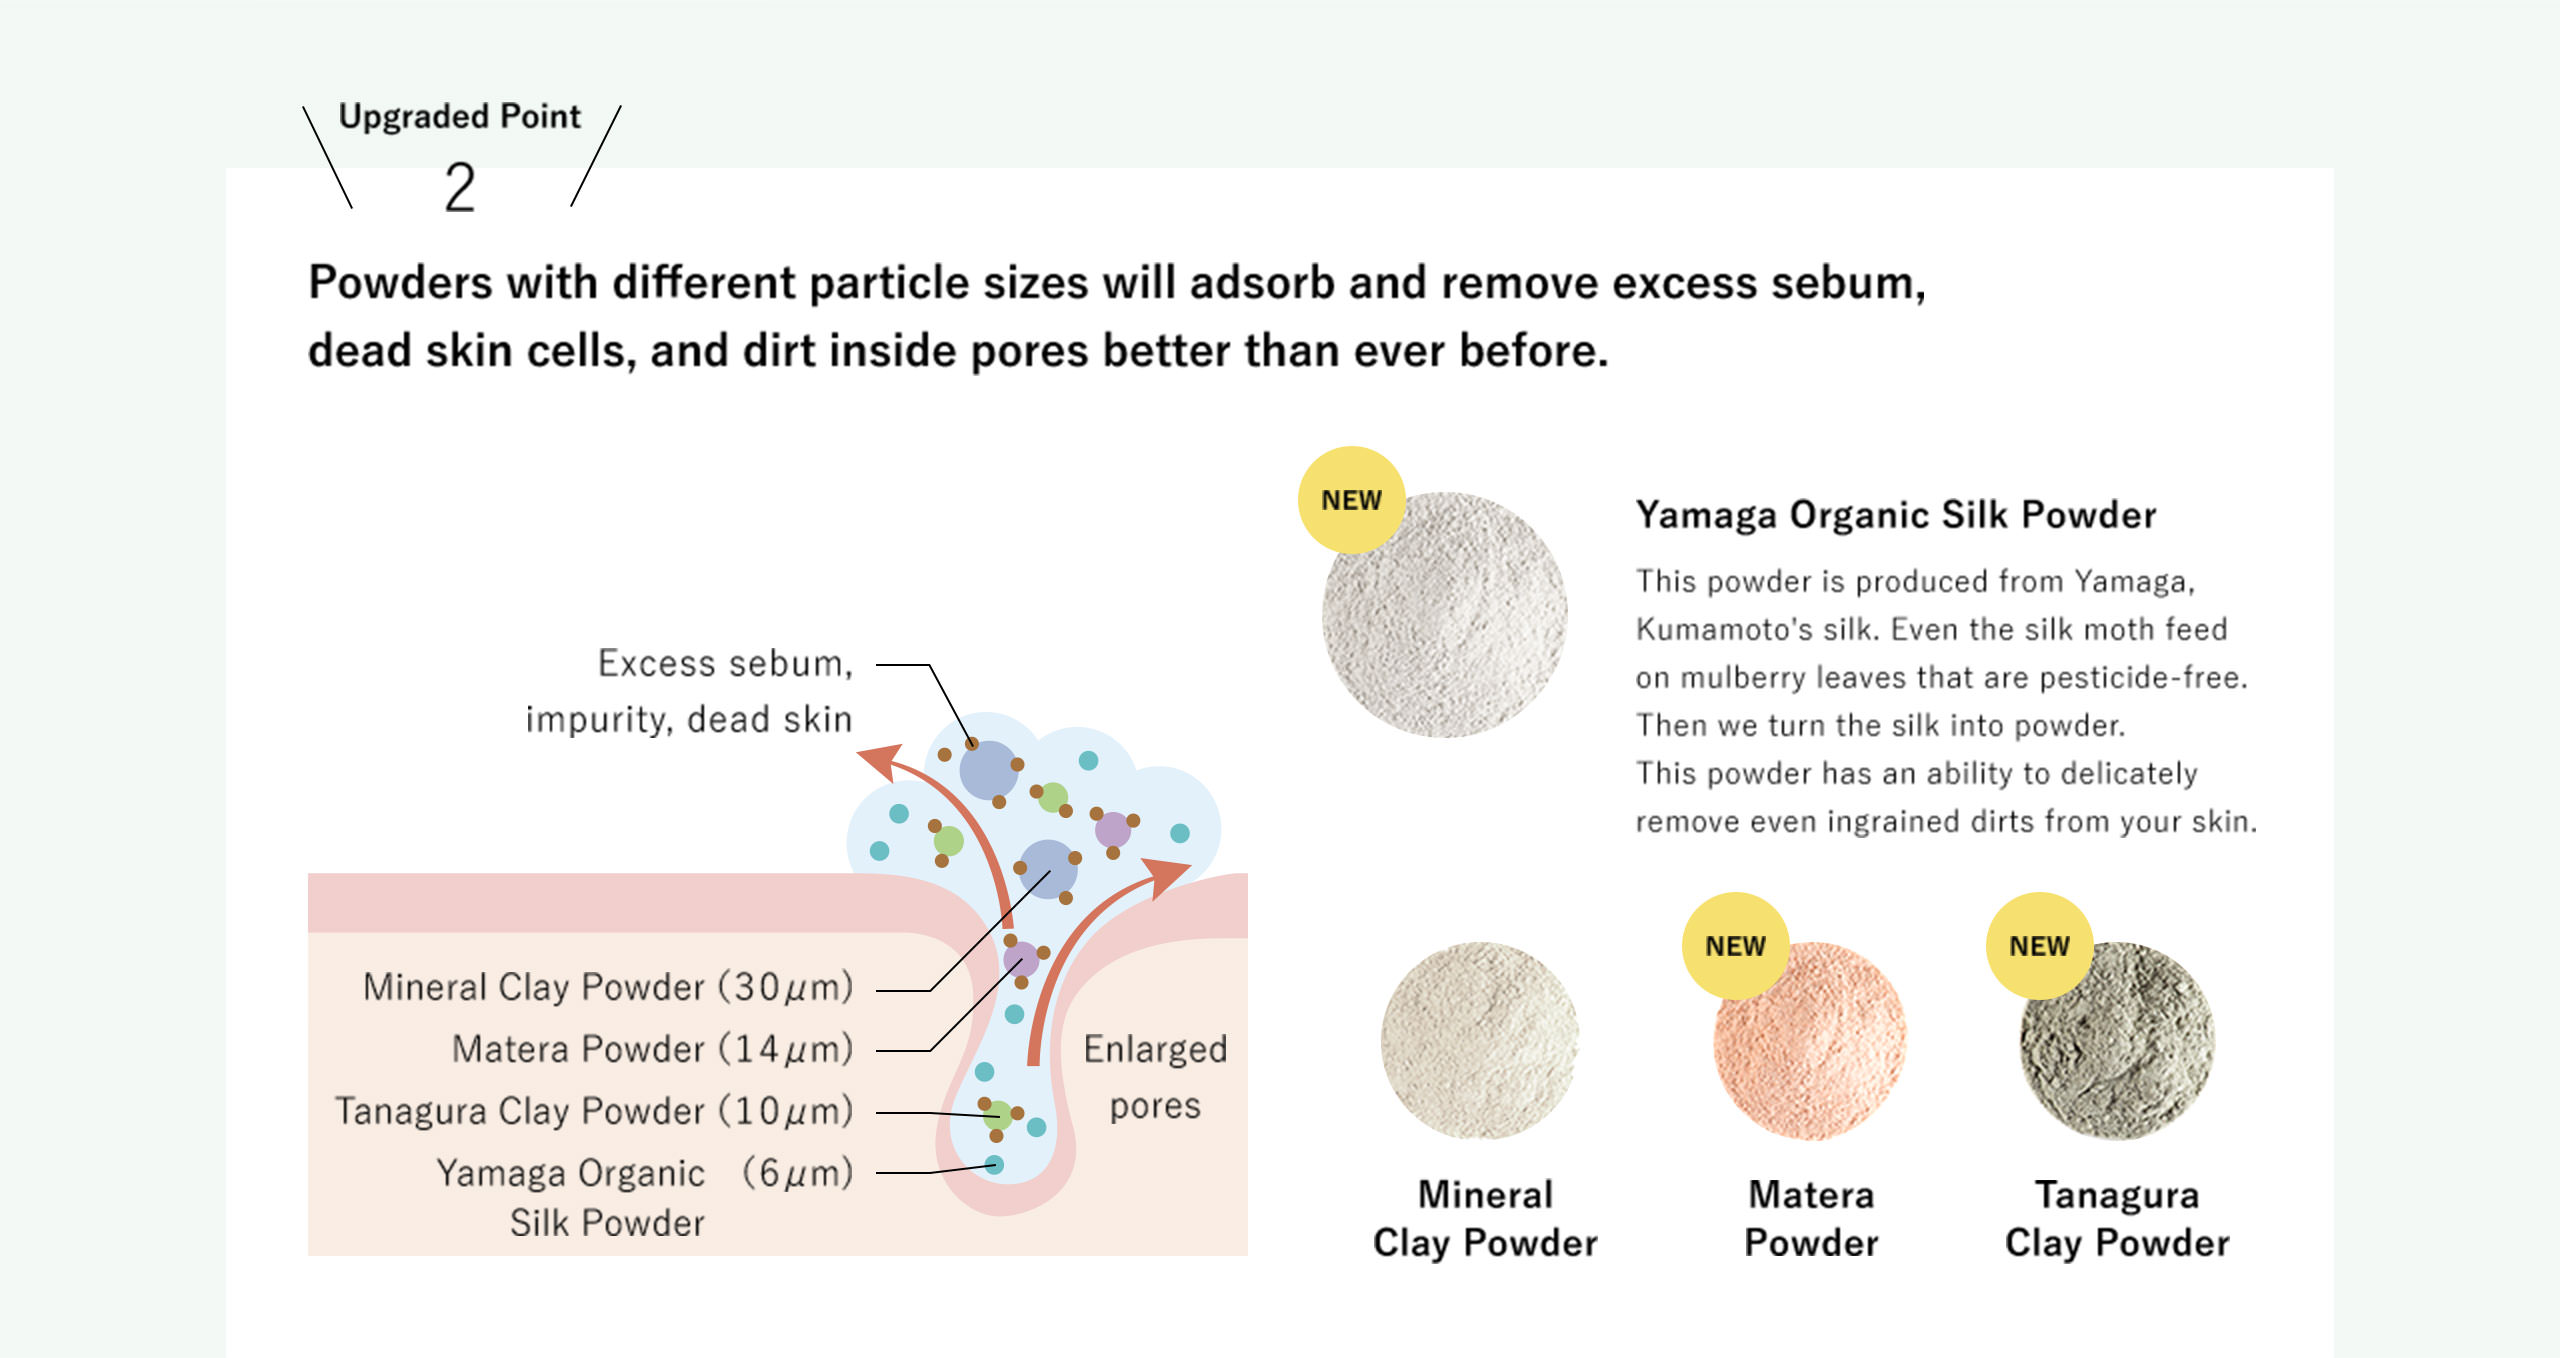 Upgraded Point 2: Powders with different particle sizes will adsorb and remove excess sebum, dead skin cells, and dirt inside pores better than ever before.